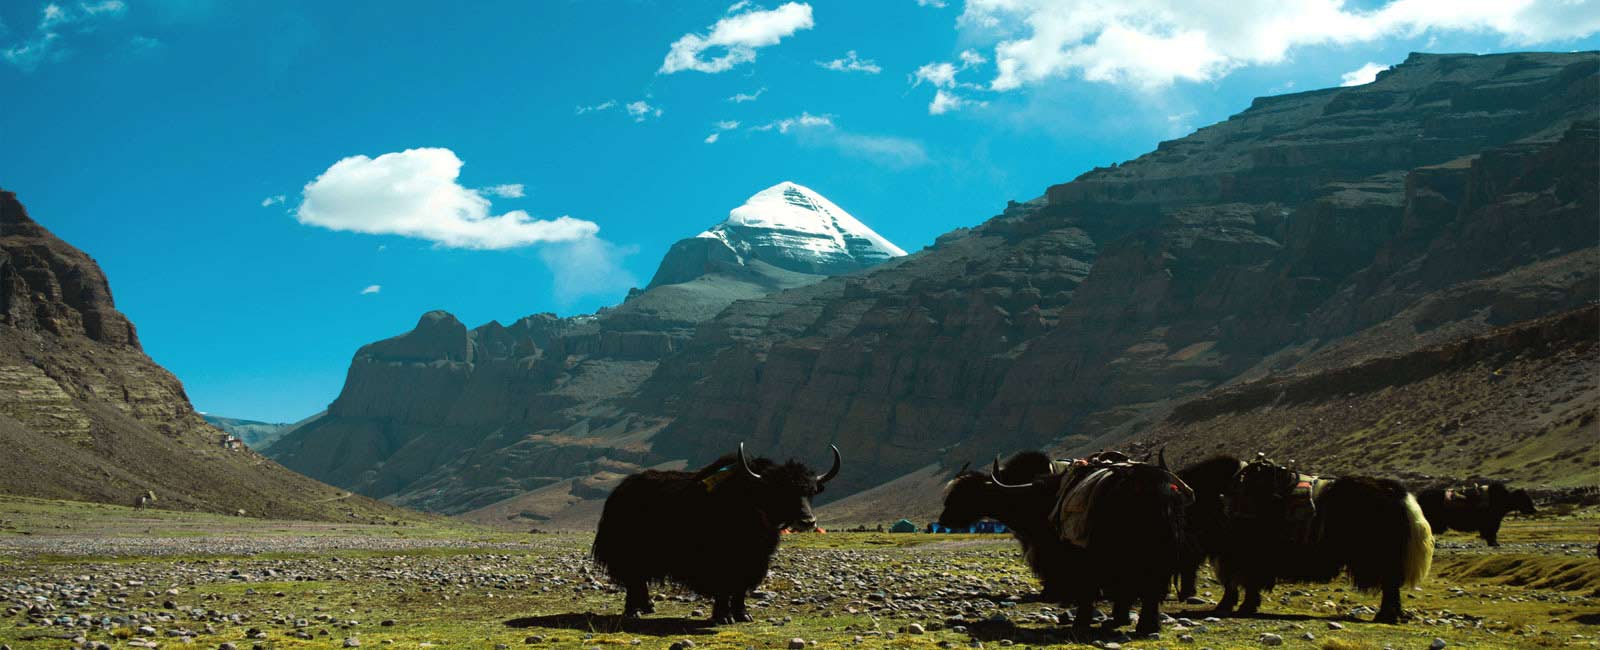 Yaks are sitting on the lap of mount kailash mountain in Tibet